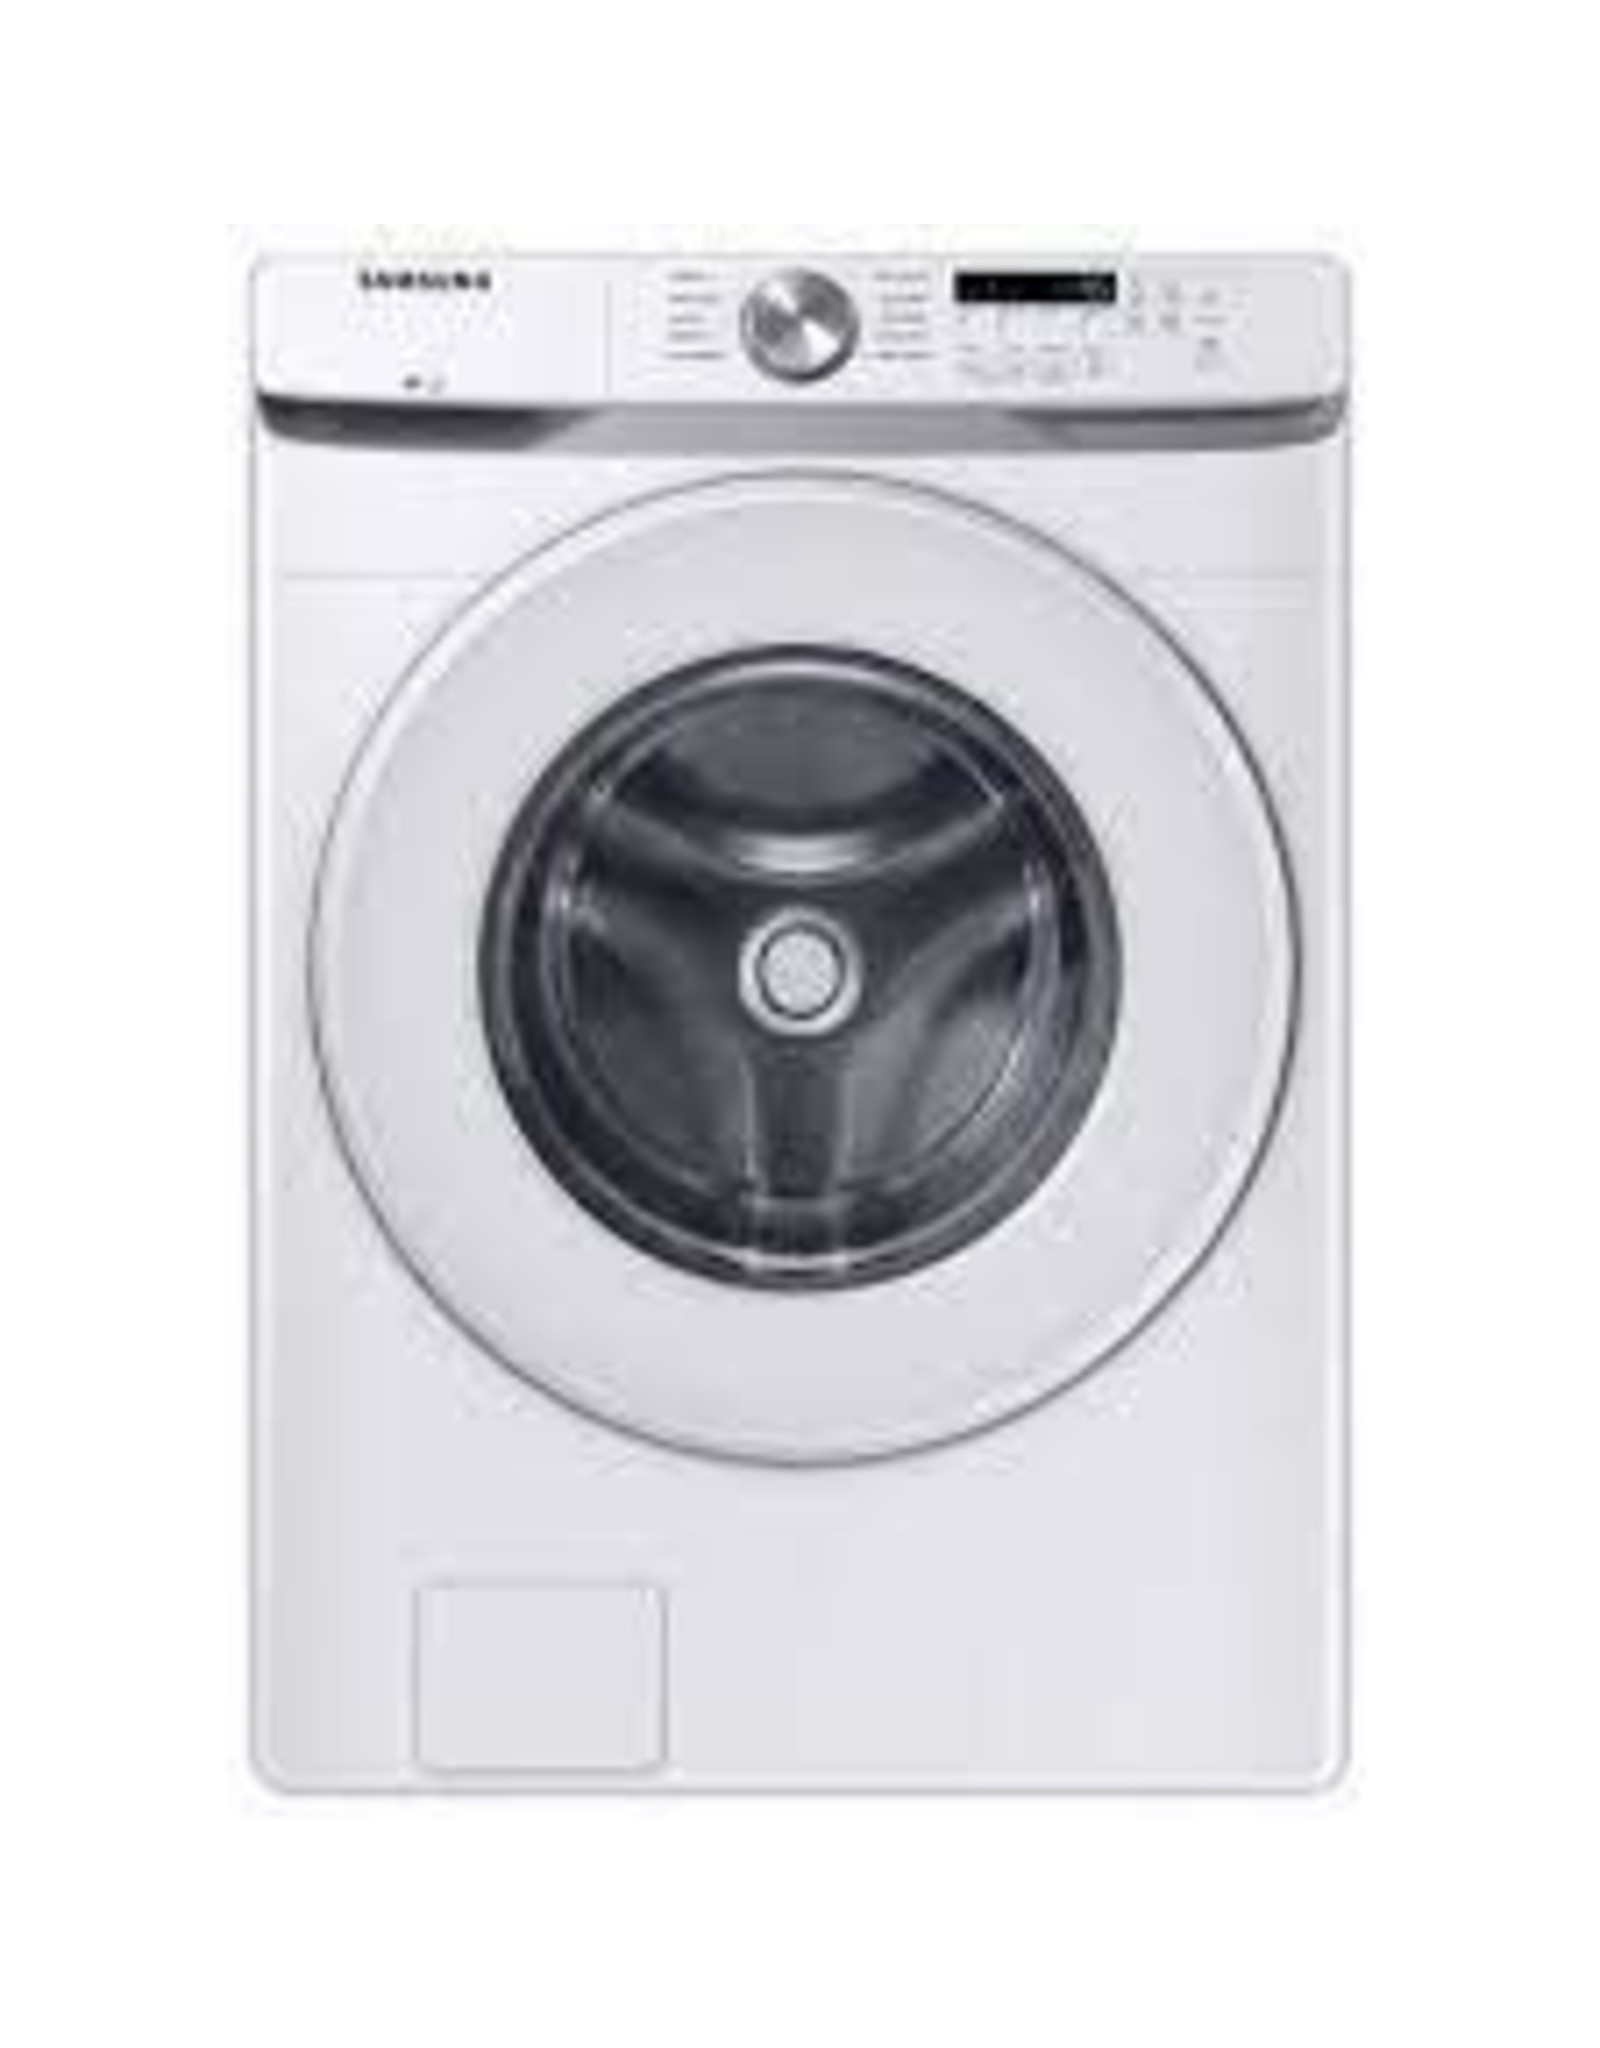 WF45T600AW 27 in. 4.5 cu. ft. High-Efficiency White Front Load Washing Machine with Self-Clean+, ENERGY STAR